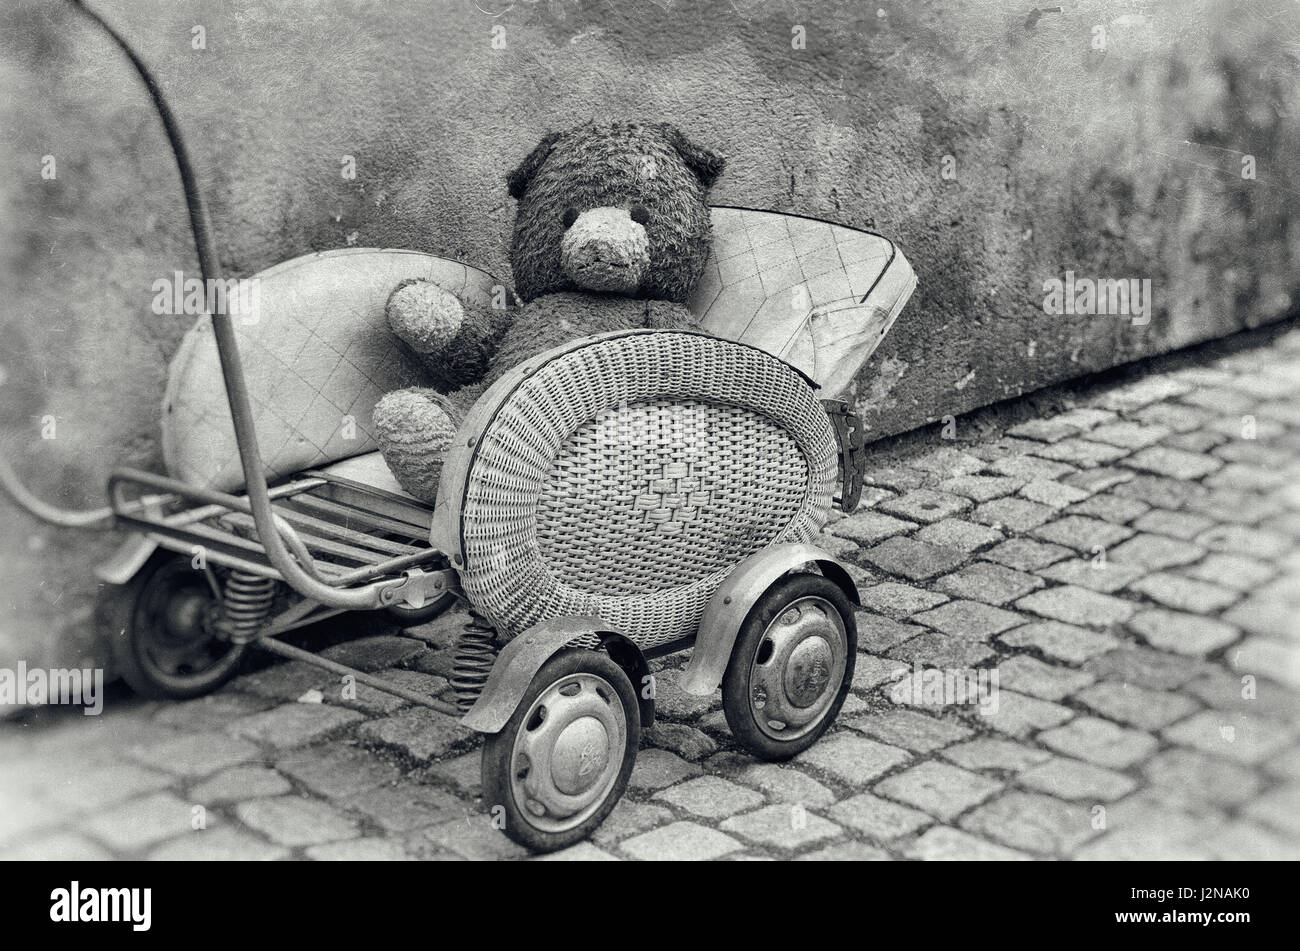 Old dirty Teddy bear toy sitting in the retro baby carriage on the street - lost lonely children concept, vintage hipster grunge image, black and whit Stock Photo